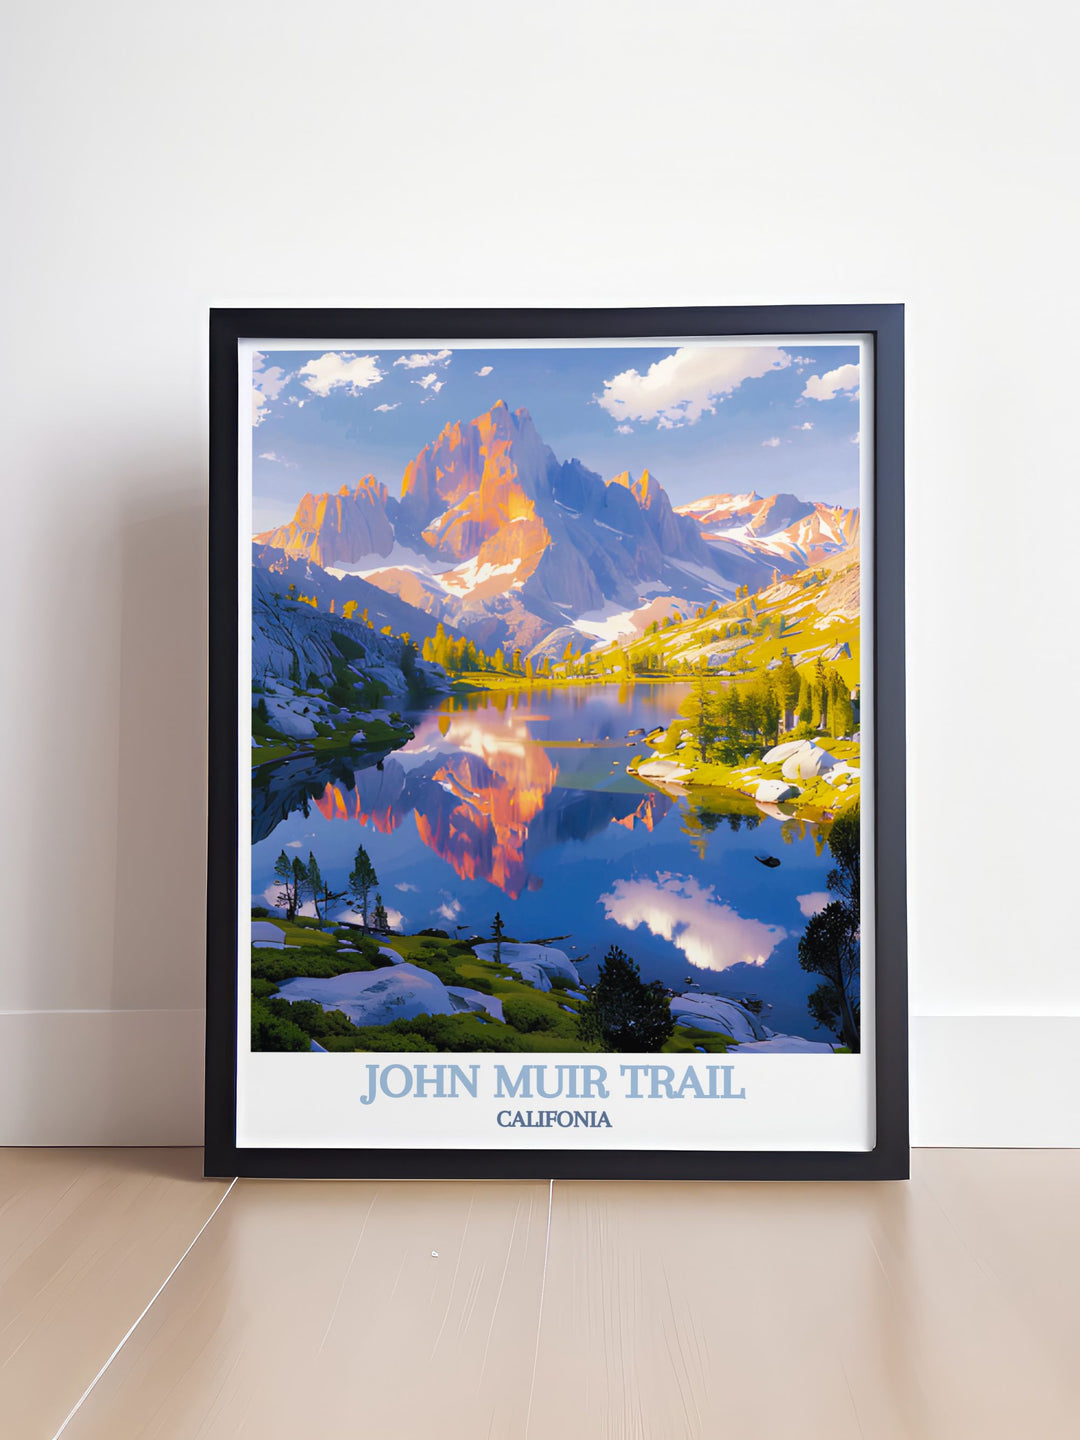 Reveal the majestic wilderness of the John Muir Trail, known for its towering peaks, alpine lakes, and lush meadows. Perfect for hikers and nature lovers, this artwork captures the rugged beauty of the Sierra Nevada.